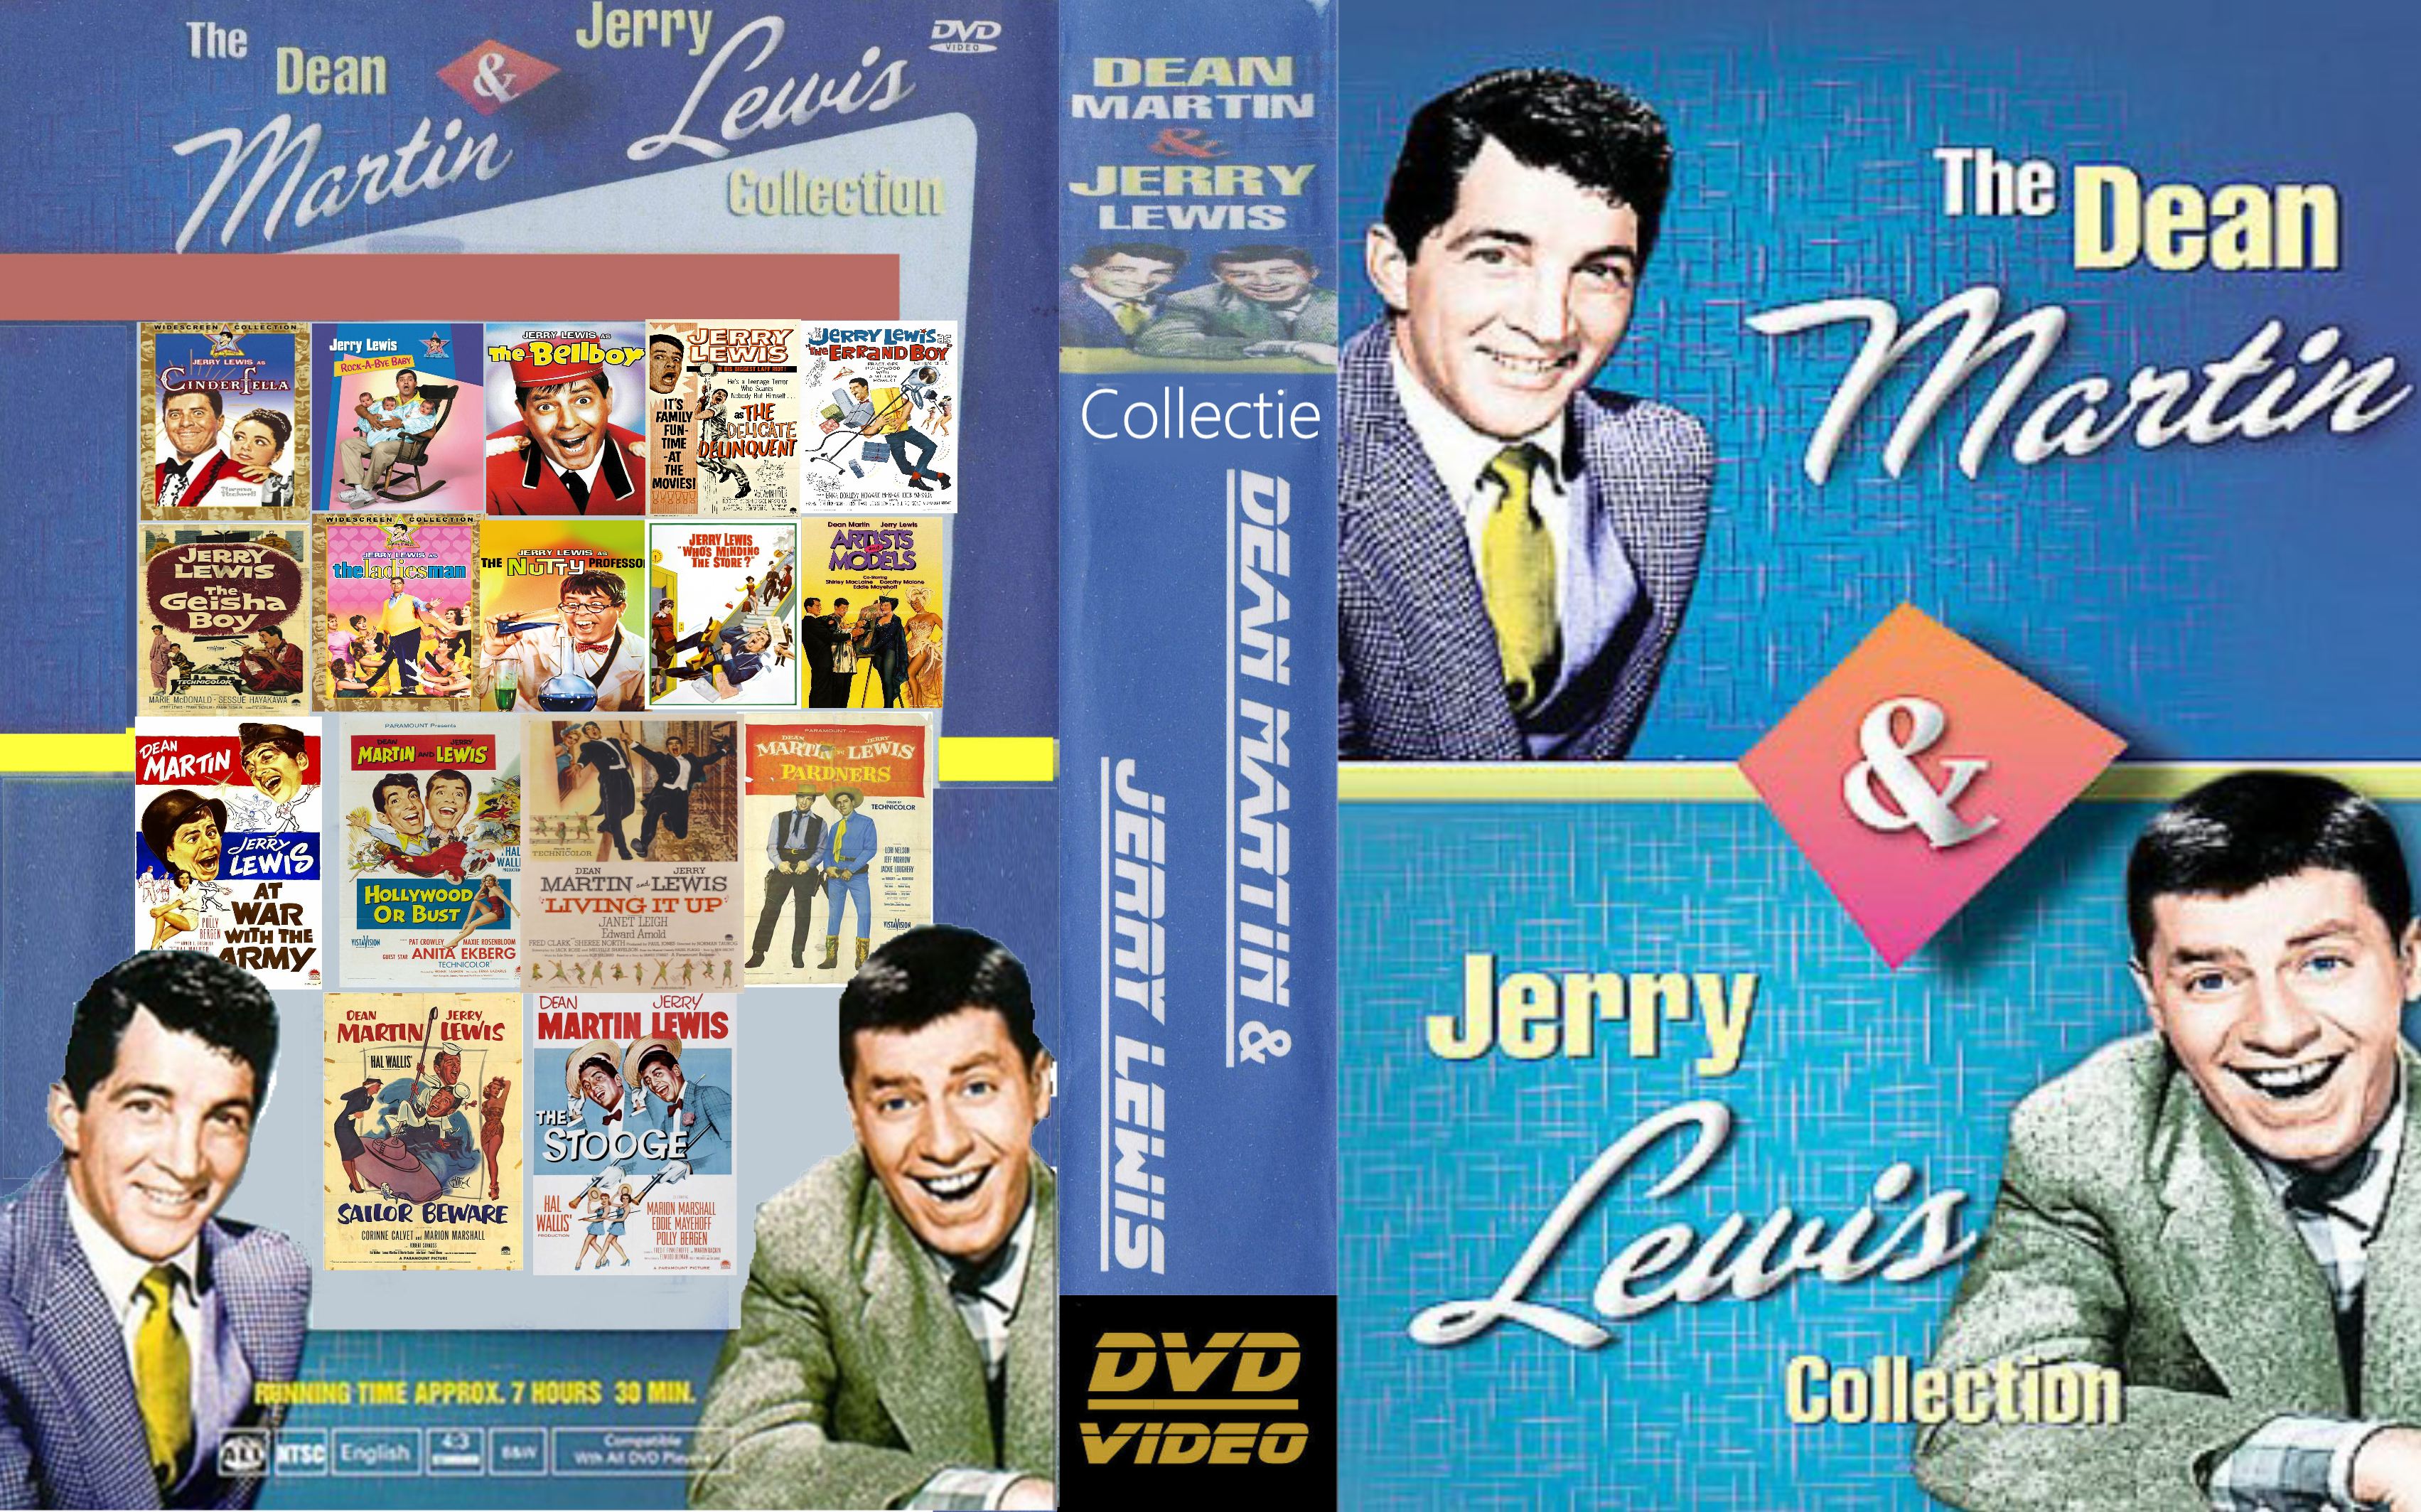 Jerry lewis & Dean Martin Collectie - Living it Up (1954)